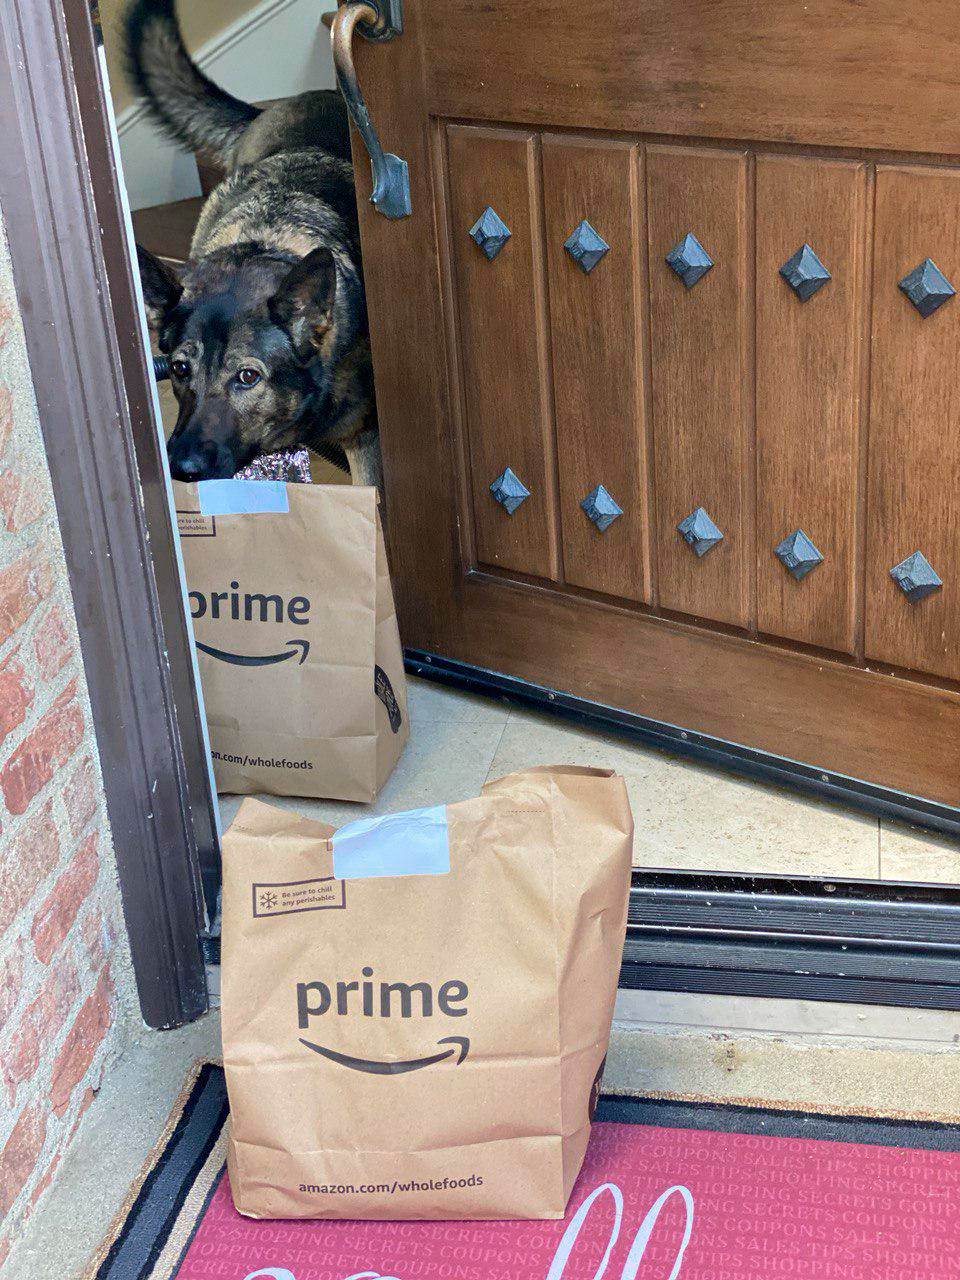 Amazon Prome Delivery Coupons